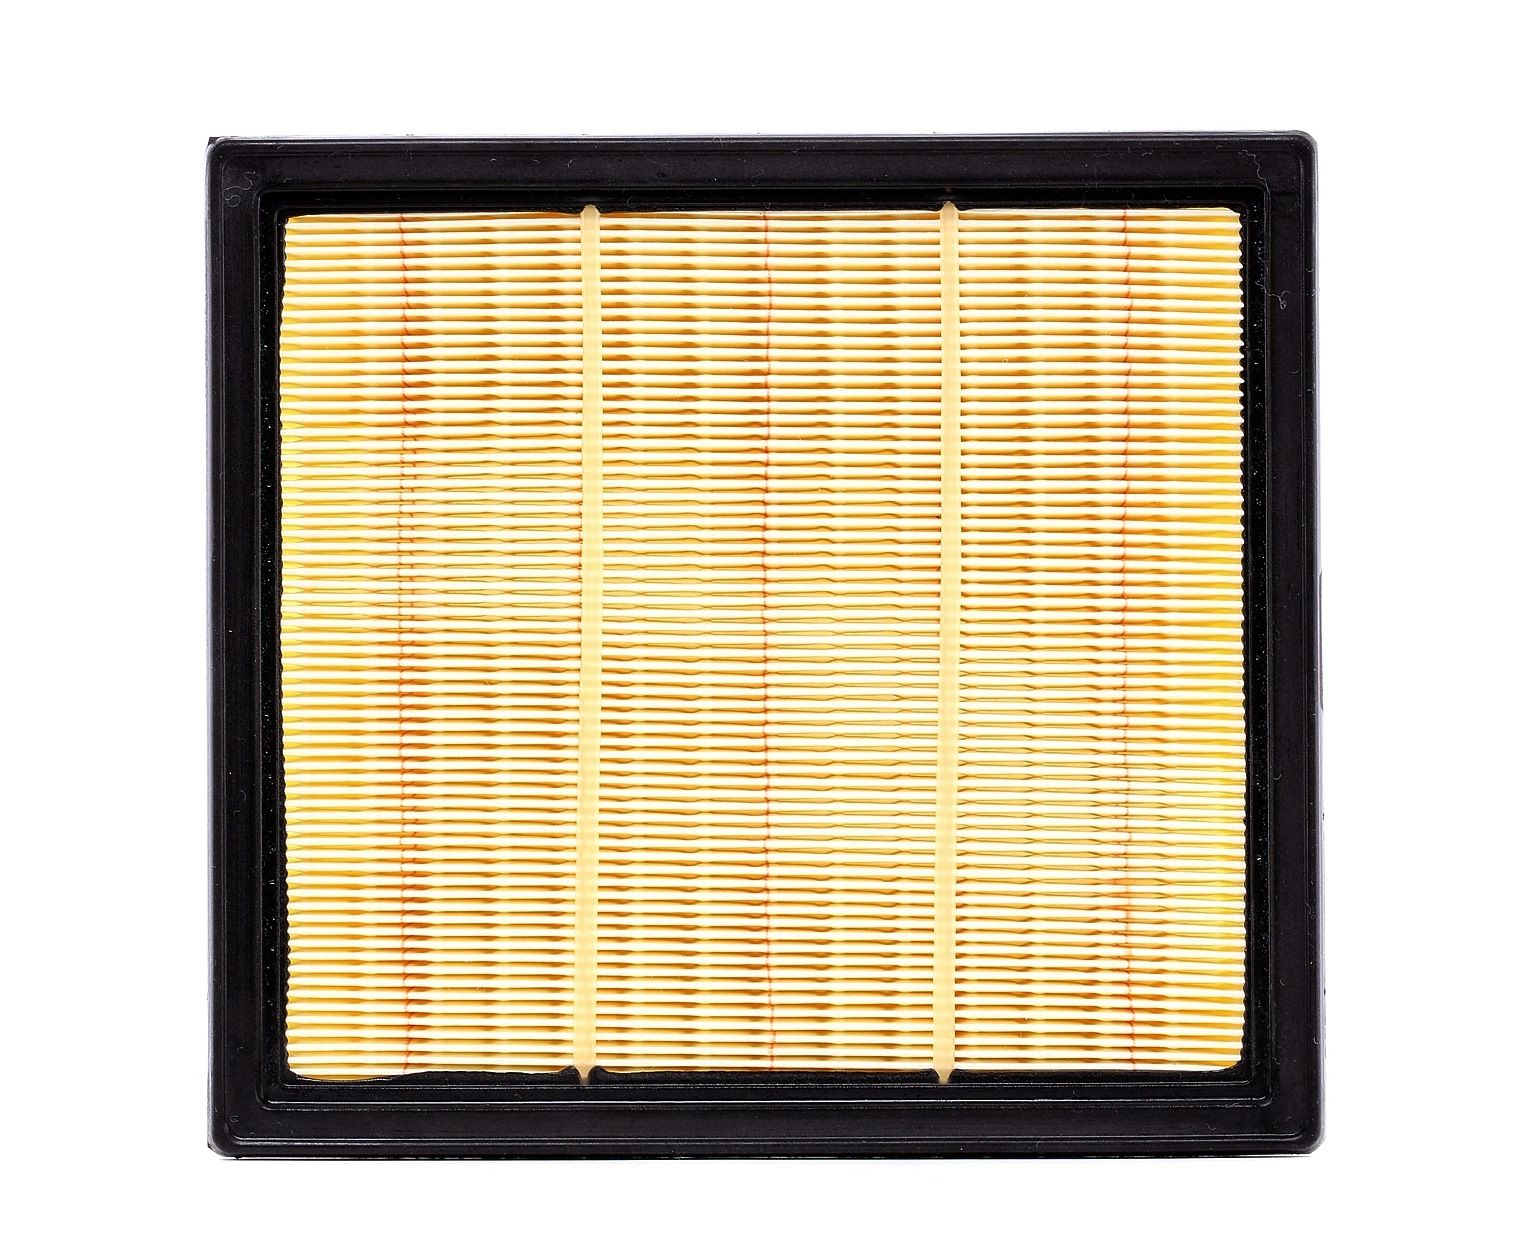 N1329024 NIPPARTS Air filters FIAT 61mm, 250mm, 230mm, Filter Insert, for dusty operating conditions